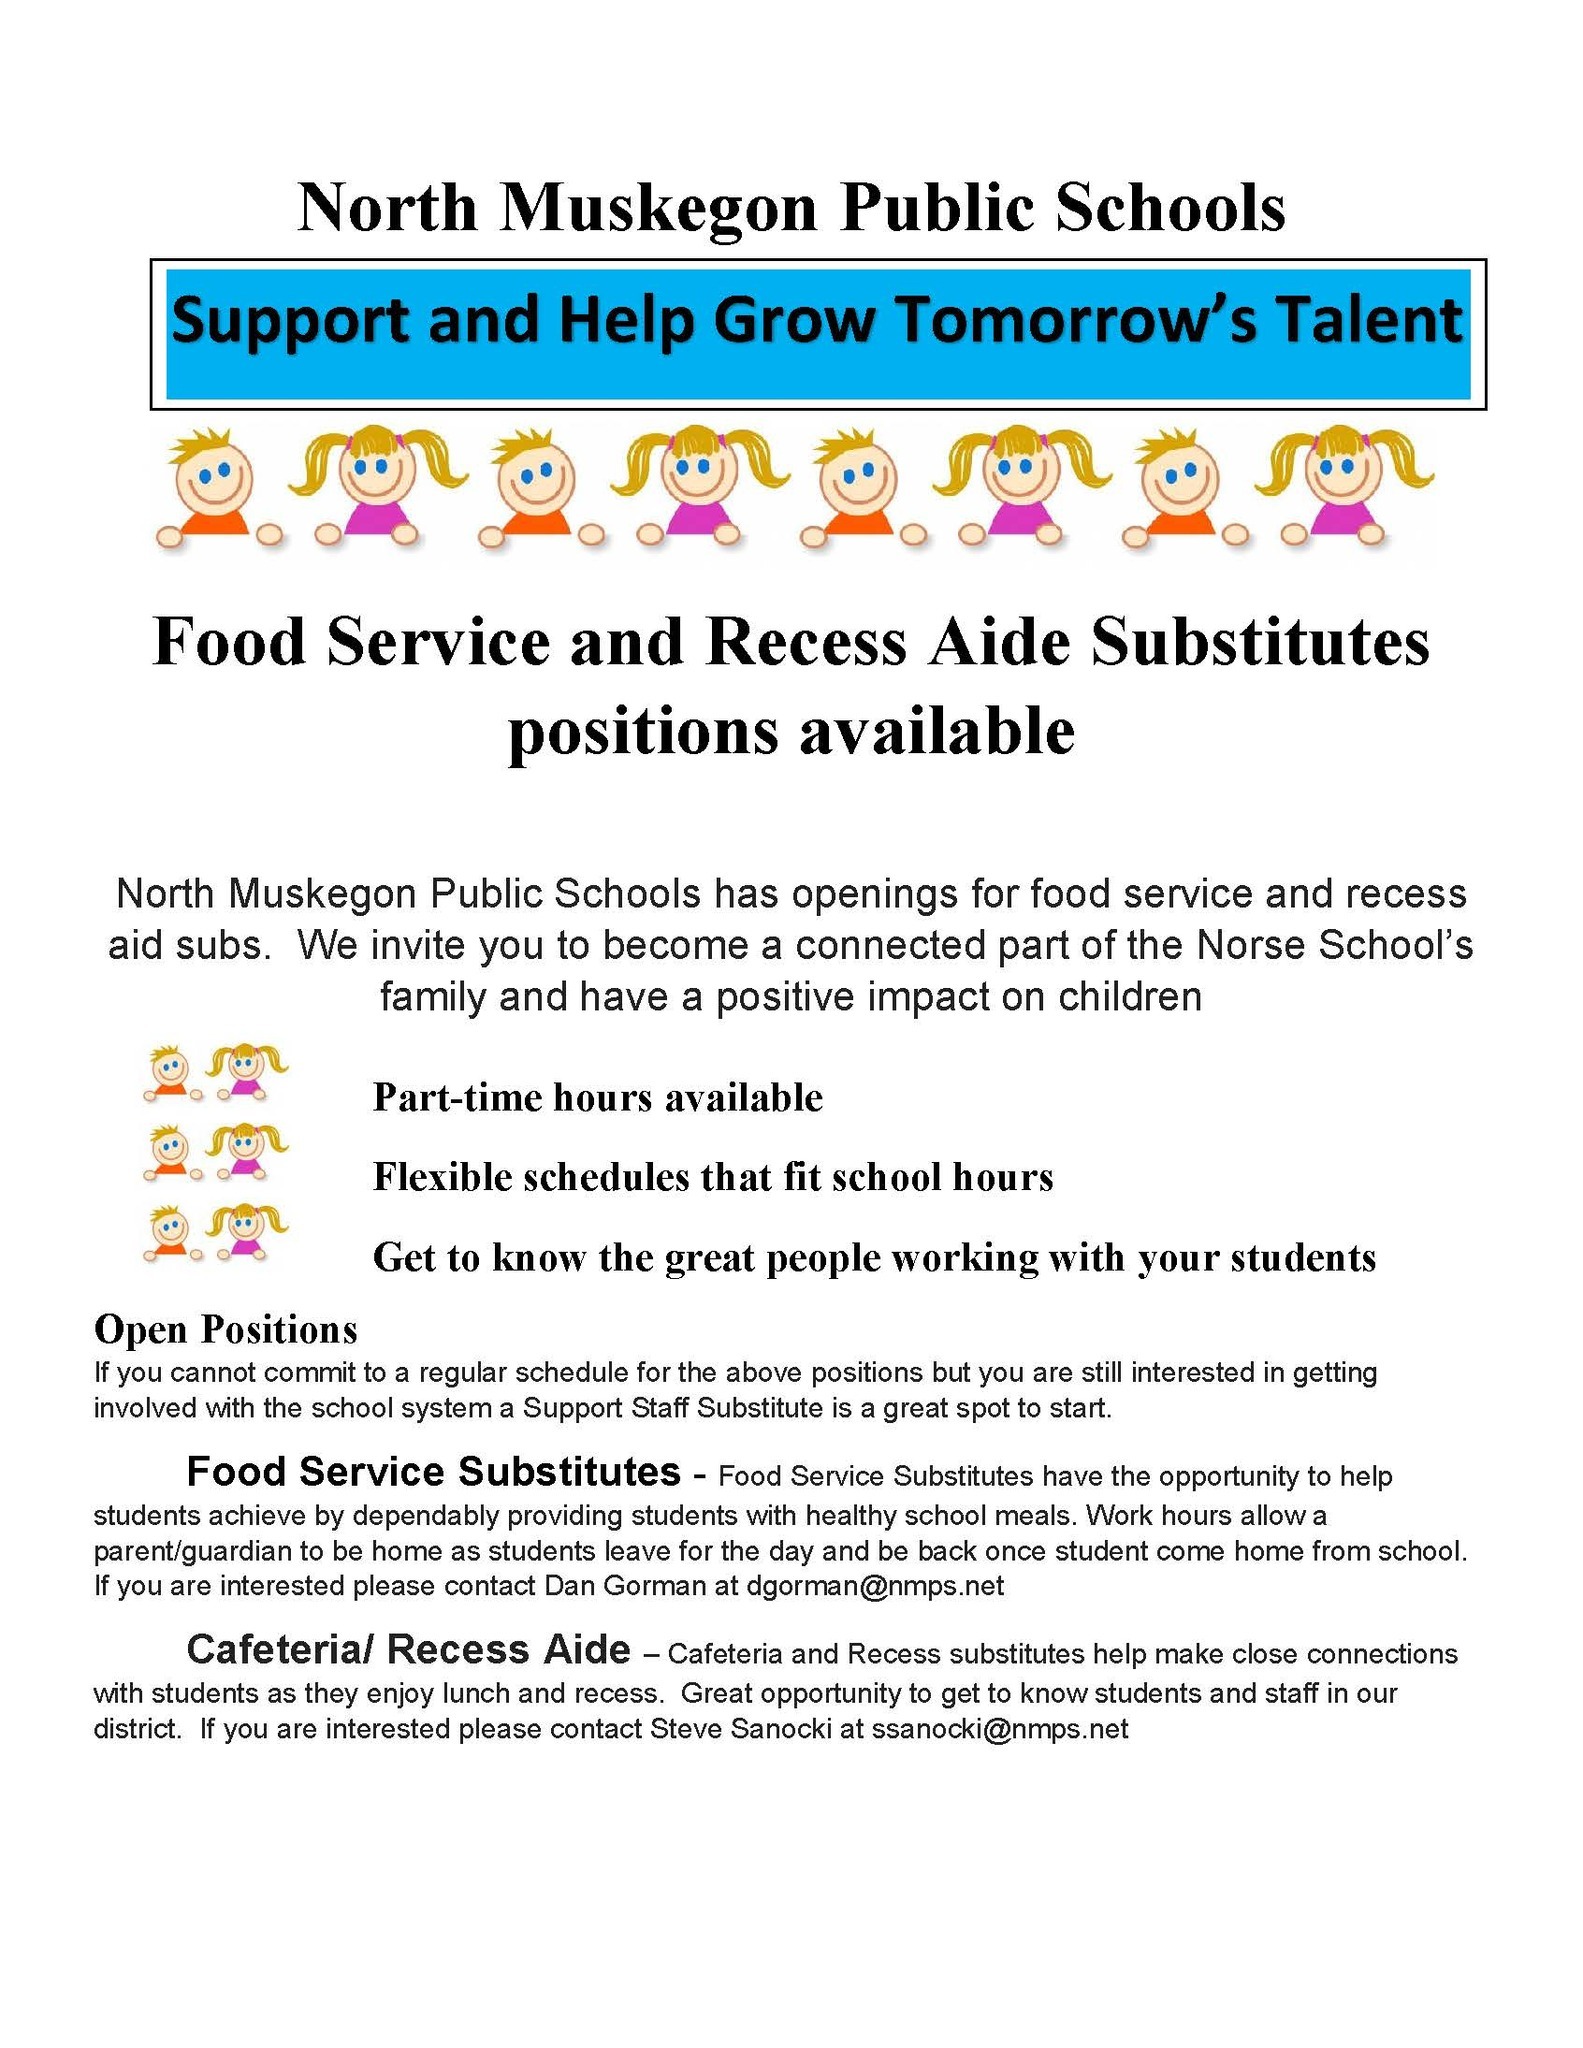 Food Service and Recess Aide Substitutes Positions Available